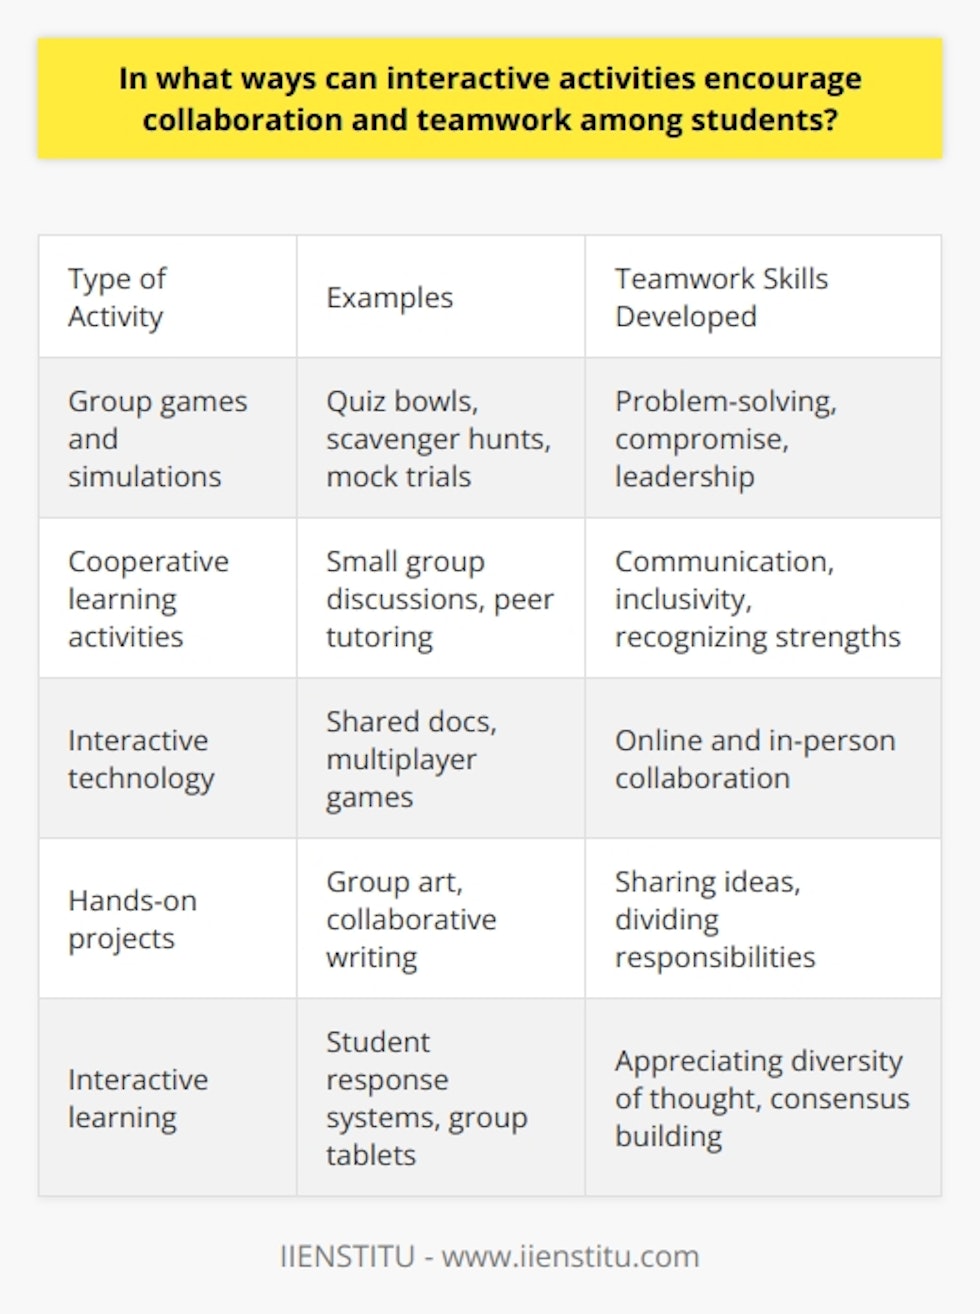 Here is some detailed content on how interactive activities can encourage collaboration and teamwork among students:Interactive activities provide great opportunities for students to develop teamwork, communication, and collaboration skills. Working together on engaging projects teaches students to share perspectives, divide responsibilities, and use each other's strengths to achieve shared goals. Several types of hands-on group activities are particularly effective for building teamwork.Group games and simulations are a fun way to foster teamwork by giving students a common challenge. Educational games that require teamwork, like quiz bowls, scavenger hunts, or interactive puzzles, promote collaboration by needing students to collectively apply their knowledge. Role-playing activities like mock trials or model UN sessions teach important skills like compromise, leadership, and group decision-making. By working together creatively to win or solve these simulations, students learn teamwork.Cooperative learning activities maximize participation and idea exchange. Small group discussions, peer tutoring programs, and collaborative writing or art projects give each student a voice and promote inclusivity. Teachers can form groups with diverse skillsets to encourage recognizing others' strengths. Establishing collective goals while maintaining individual accountability further motivates students to work together.Interactive technology facilitates valuable collaboration opportunities online or in-person. Digital tools like shared docs, discussion boards, and multiplayer games allow students to team up on projects even from afar. In the classroom, interactive whiteboards, student response systems, and group laptop or tablet projects enable real-time teamwork. Embracing ed tech gives teachers more ways to encourage cooperation.When students work together on engaging hands-on activities, they gain teamwork abilities essential for school and life. Collaboration teaches students to appreciate diversity of thought, constructively resolve conflicts, and build consensus. Interactive group activities prepare students to cooperate effectively in future academics, careers, and as citizens. By promoting teamwork, interactive learning develops crucial interpersonal skills.